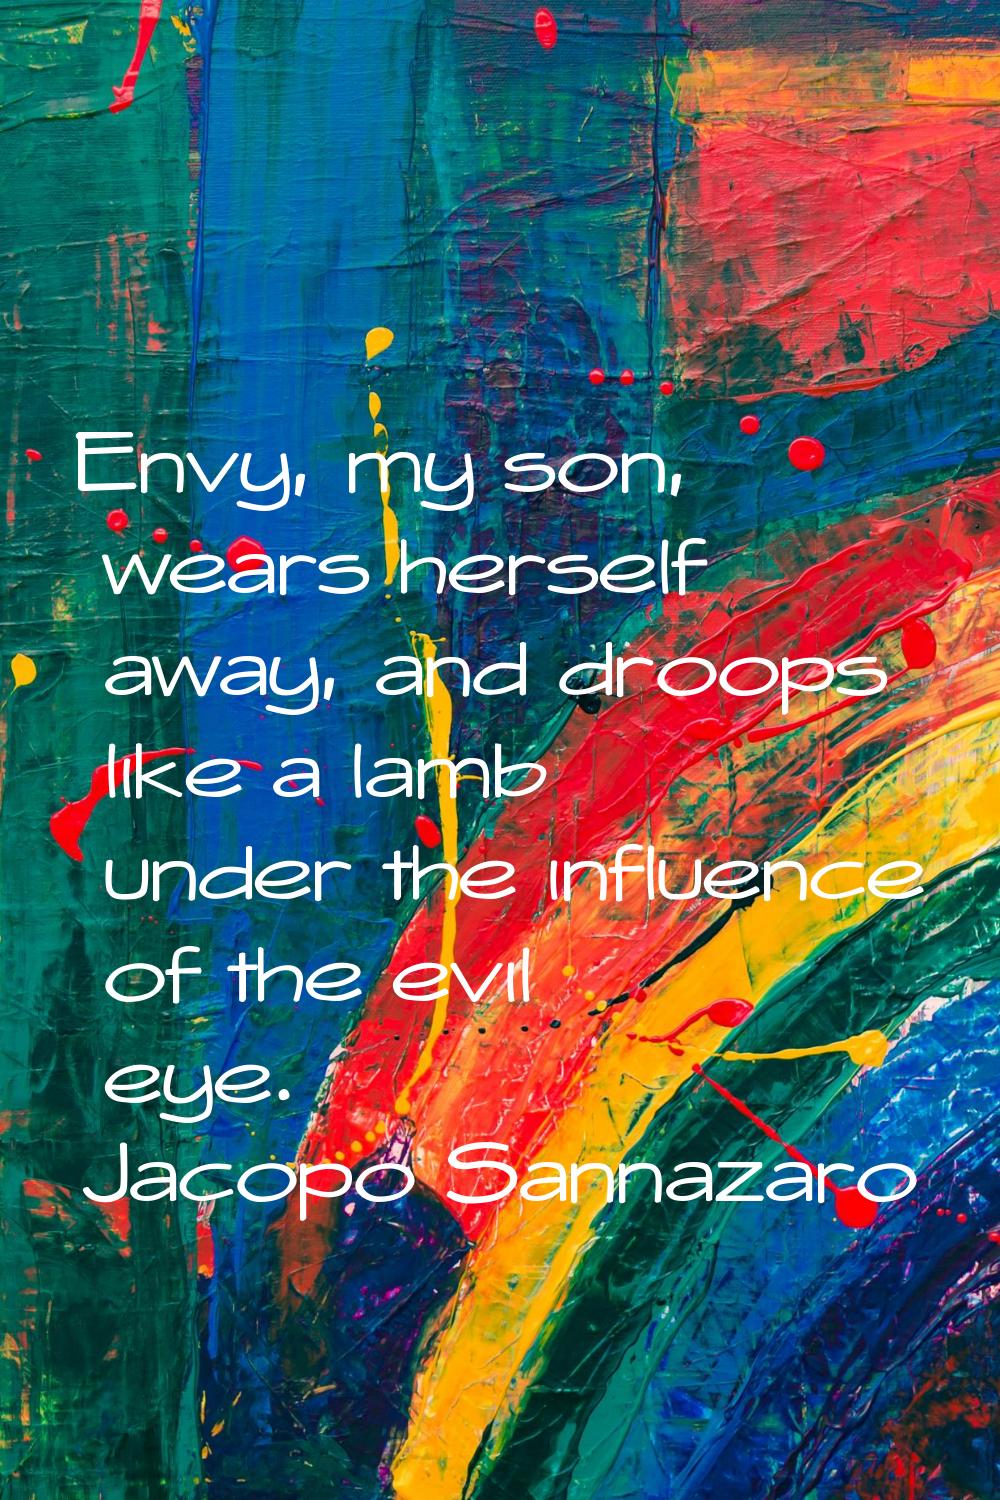 Envy, my son, wears herself away, and droops like a lamb under the influence of the evil eye.